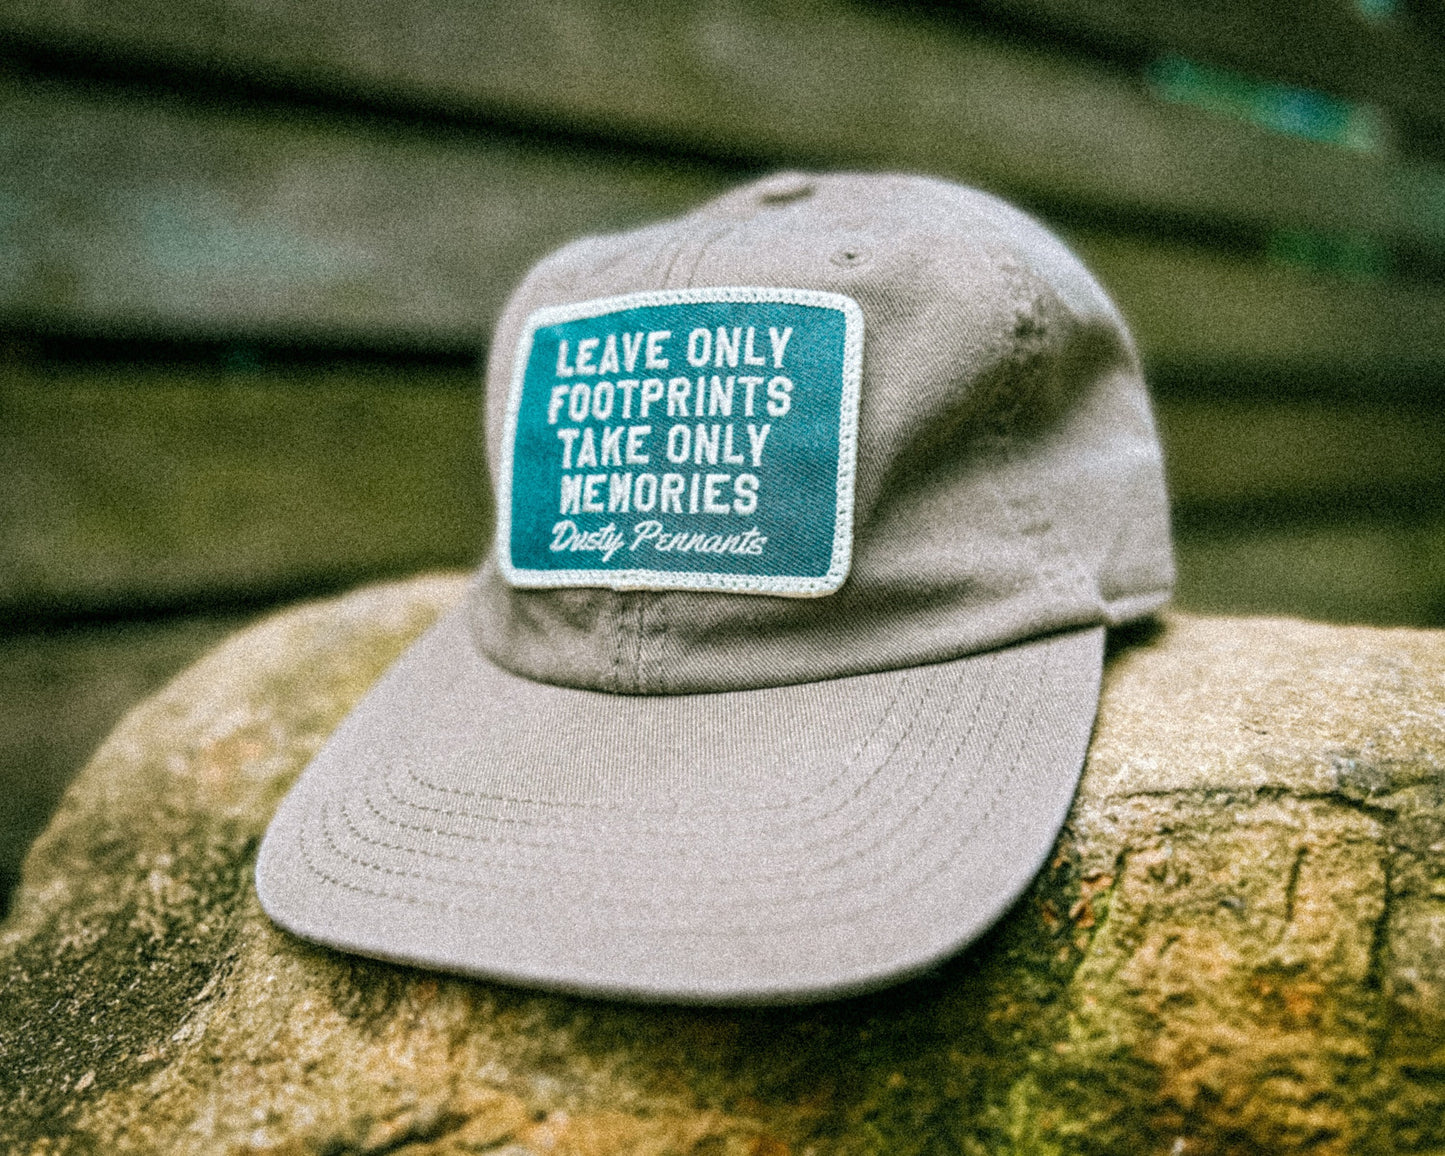 Footprints & Memories Patch Cap | faded unstructured vintage style khaki baseball hat.